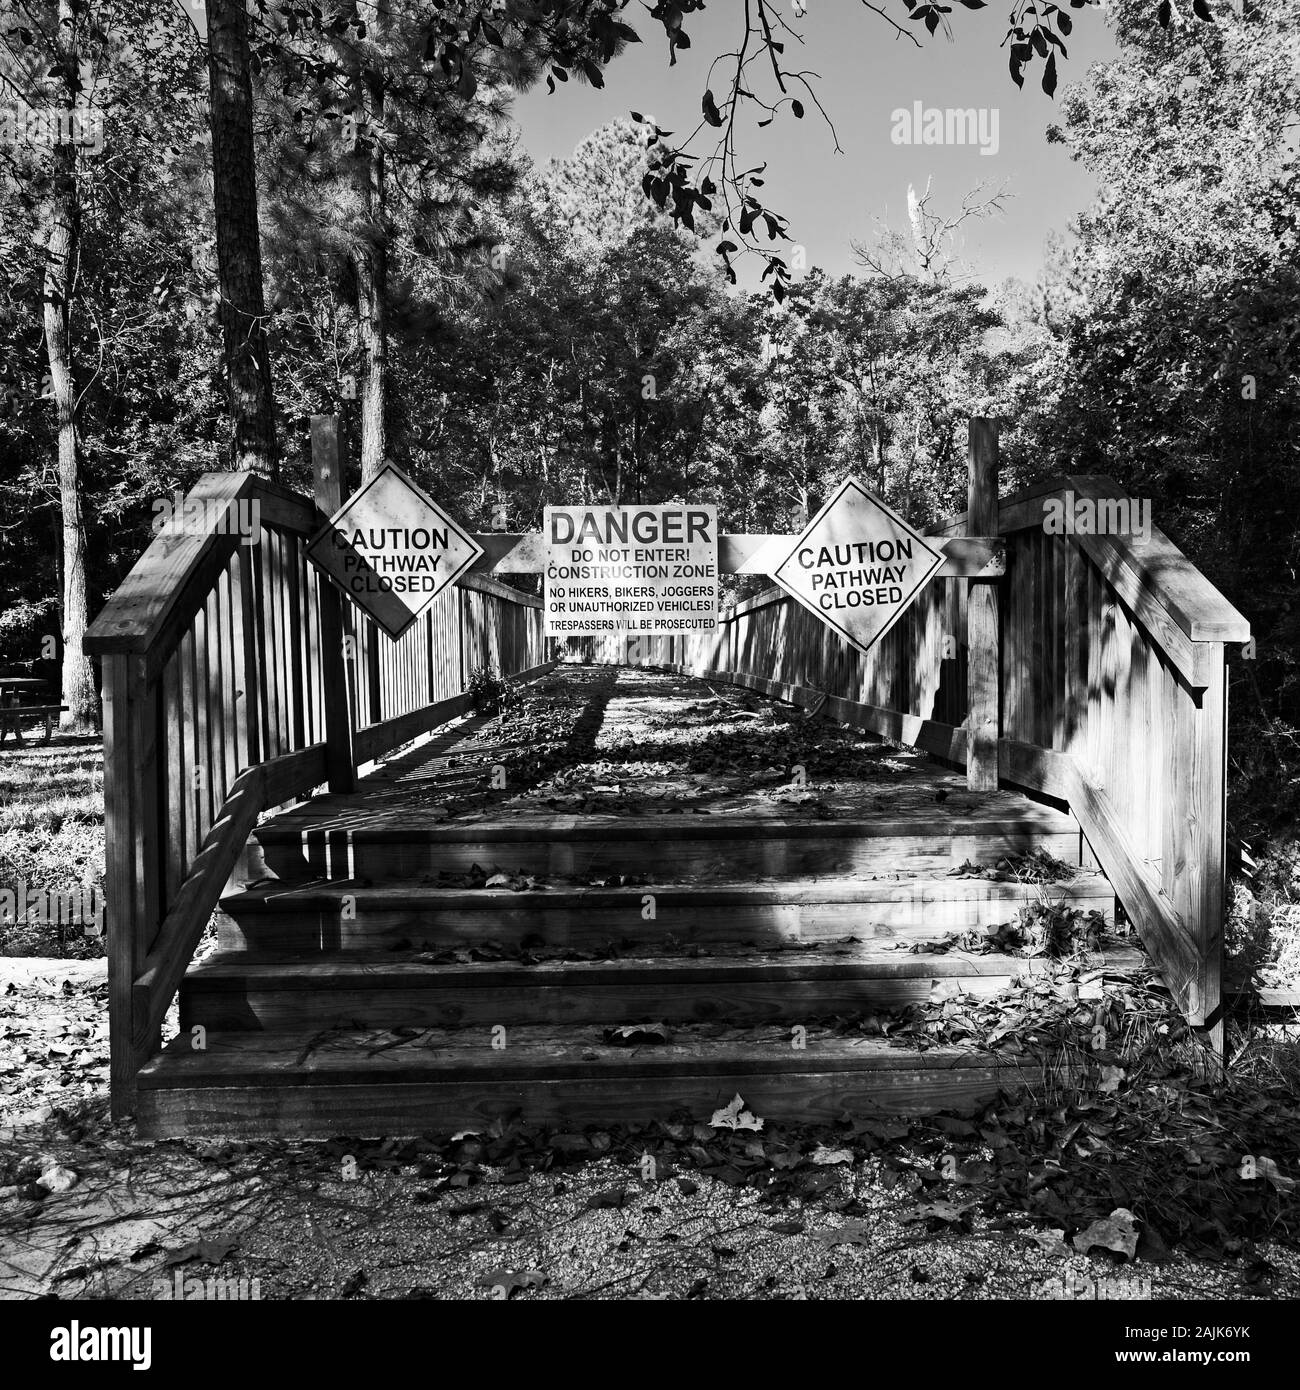 Spring TX USA - 10/10/2019  -  Wooden Bridge Closed Danger Sign in B&W Stock Photo